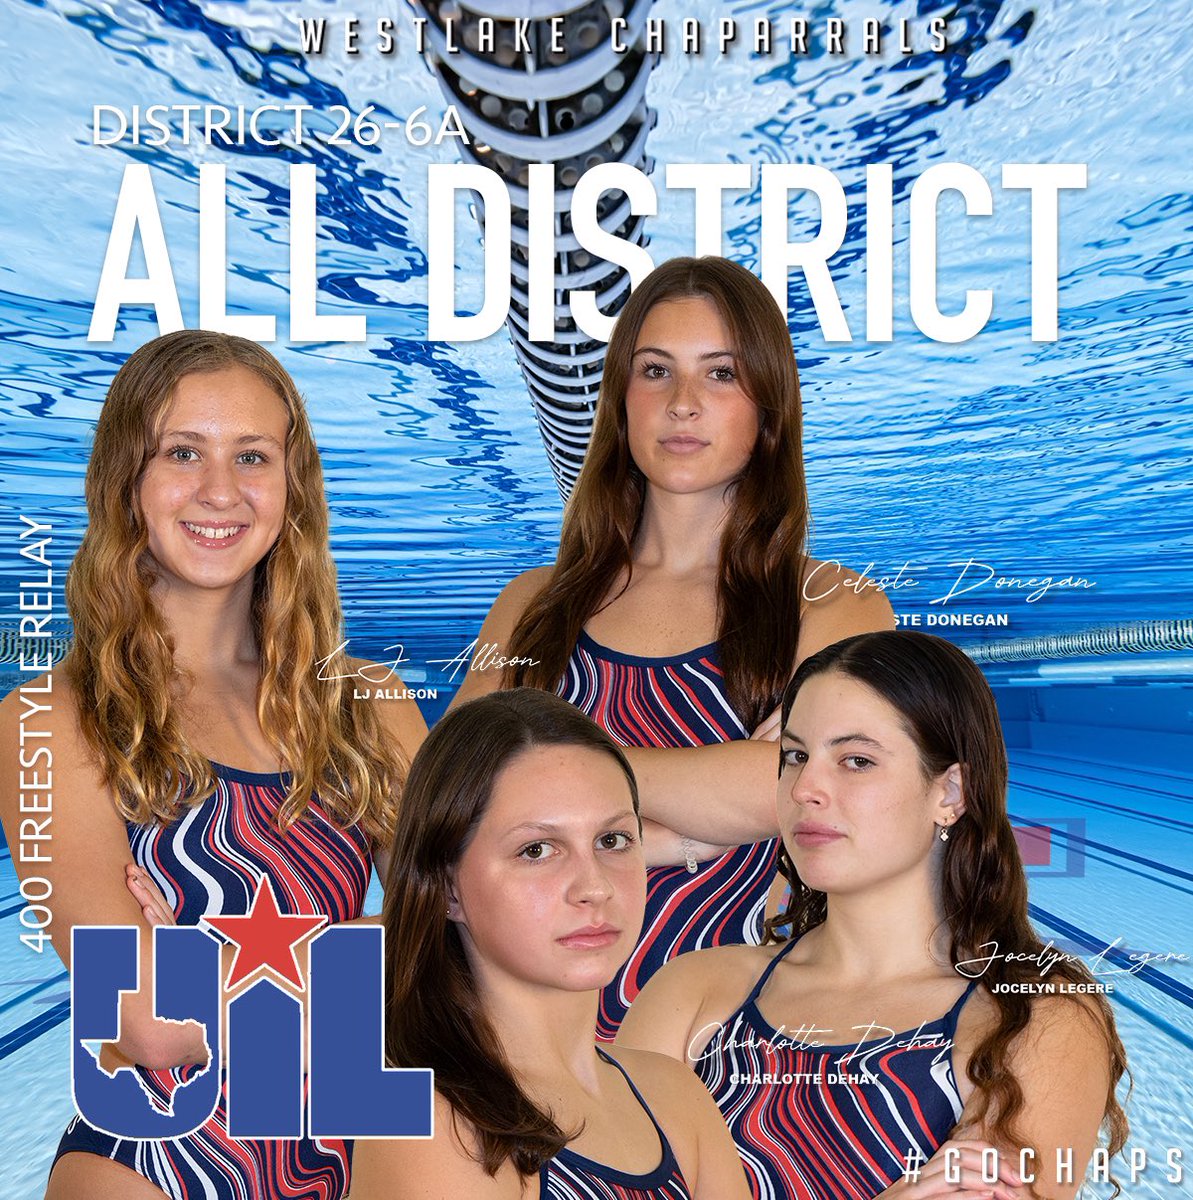 Congratulations to the four Chaps who earned a spot on the 26-6A Women’s Swimming and Diving All-District 1st Team for their performance in the 400 Freestyle Relay. #GoChaps 400 Freestyle Relay LJ Allison Charlotte Dehay Jocelyn Legere Celeste Donegan